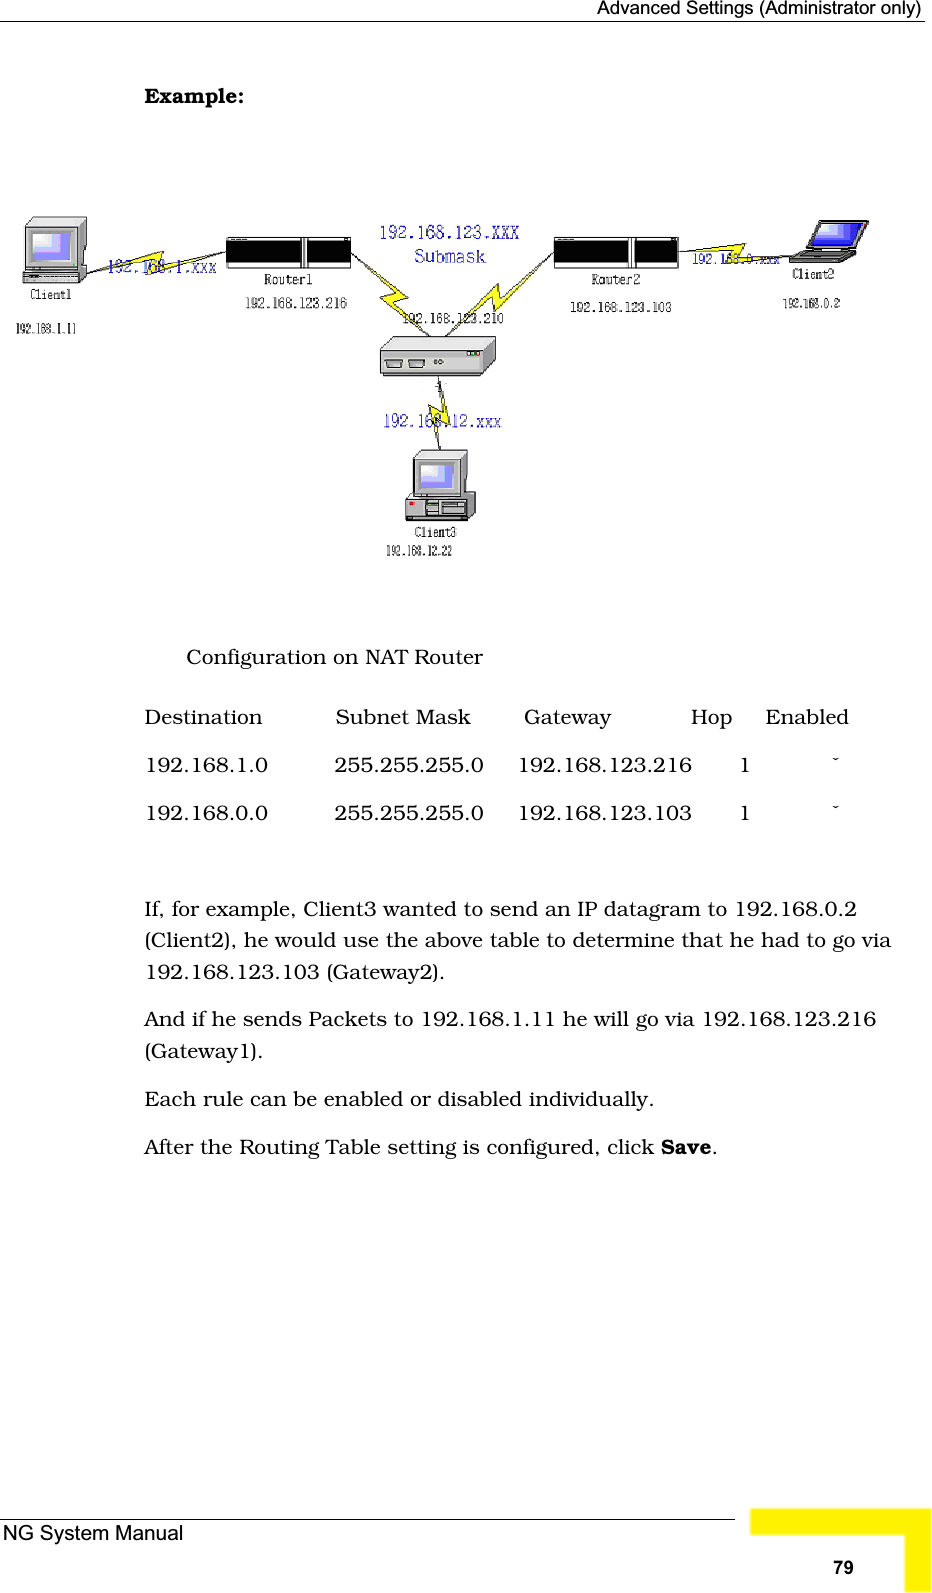 Advanced Settings (Administrator only)Example:Configuration on NAT RouterDestination   Subnet Mask  Gateway   Hop     Enabled192.168.1.0   255.255.255.0     192.168.123.216       1 ˇ192.168.0.0   255.255.255.0     192.168.123.103       1 ˇIf, for example, Client3 wanted to send an IP datagram to 192.168.0.2(Client2), he would use the above table to determine that he had to go via192.168.123.103 (Gateway2).And if he sends Packets to 192.168.1.11 he will go via 192.168.123.216(Gateway1).Each rule can be enabled or disabled individually.After the Routing Table setting is configured, click Save.NG System Manual79